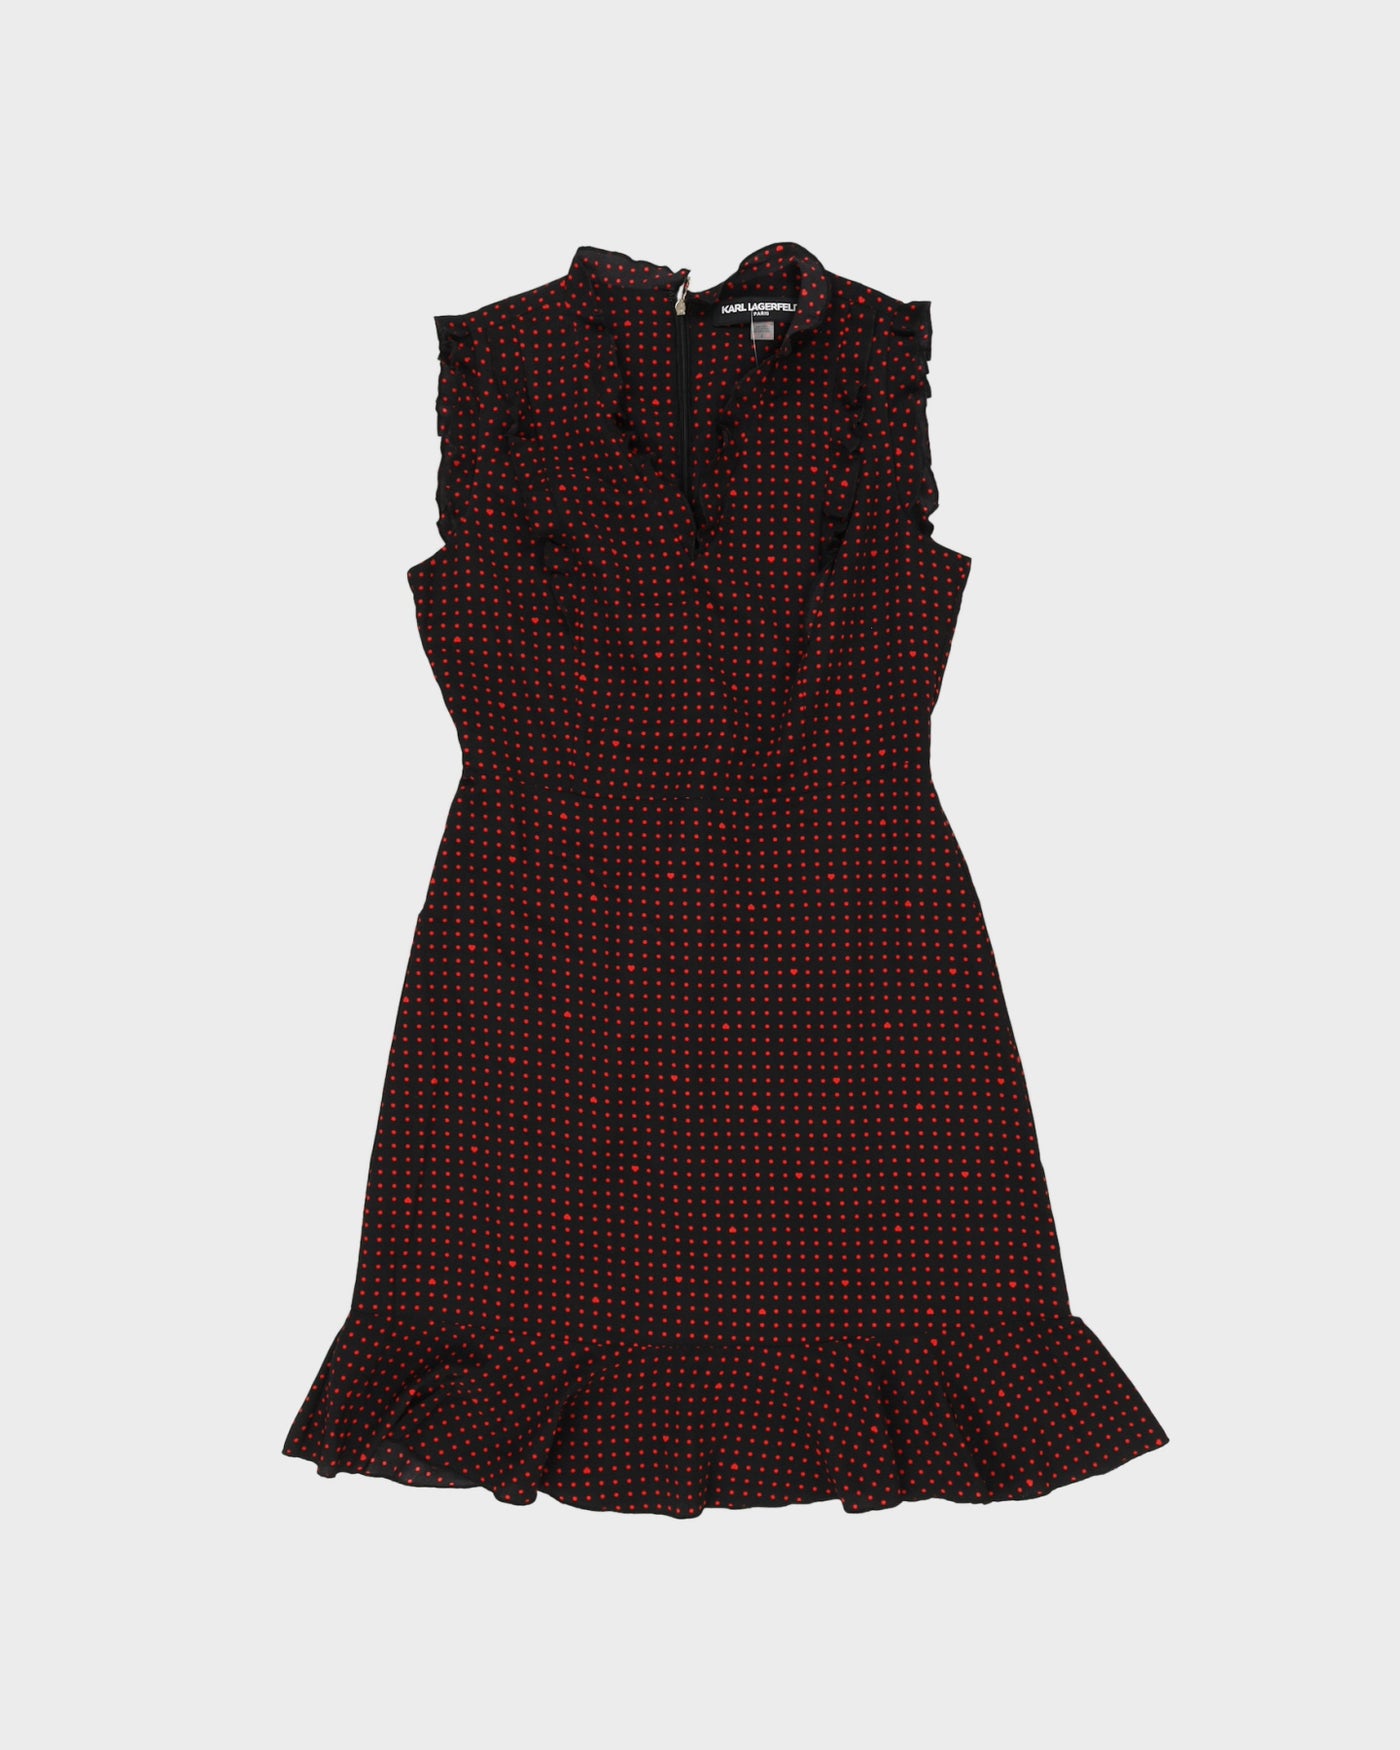 Karl Lagerfeld Balck With Red Polka Dots Dress - M